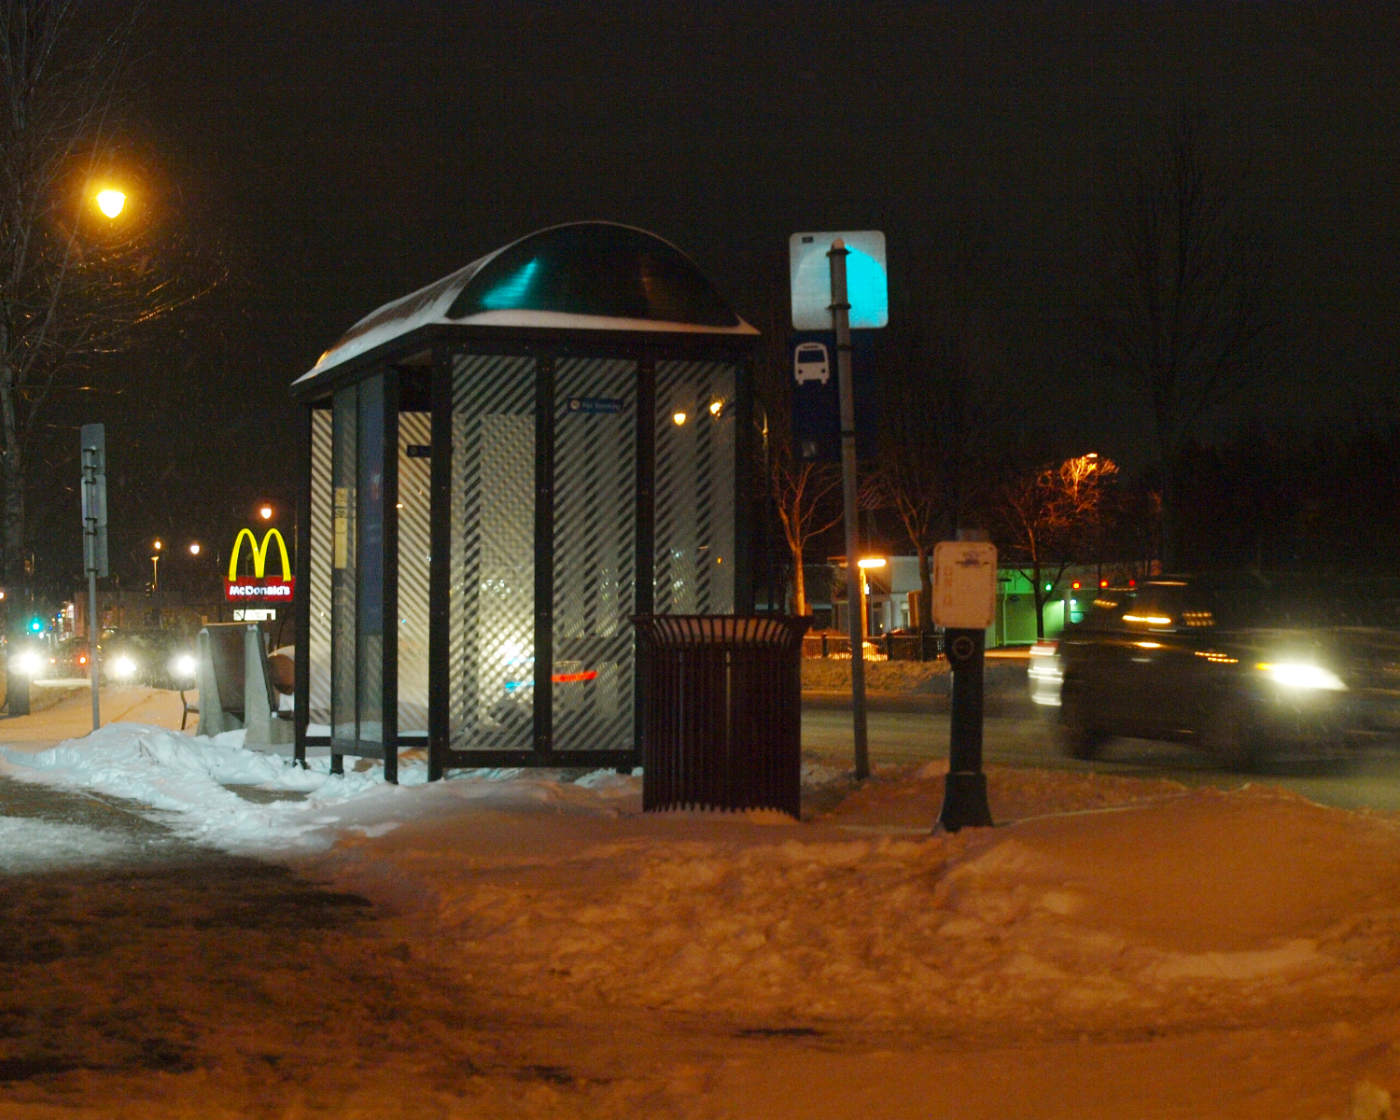 Snowy night scene of bus stop lit by streetlights and car lights with retail signs in background